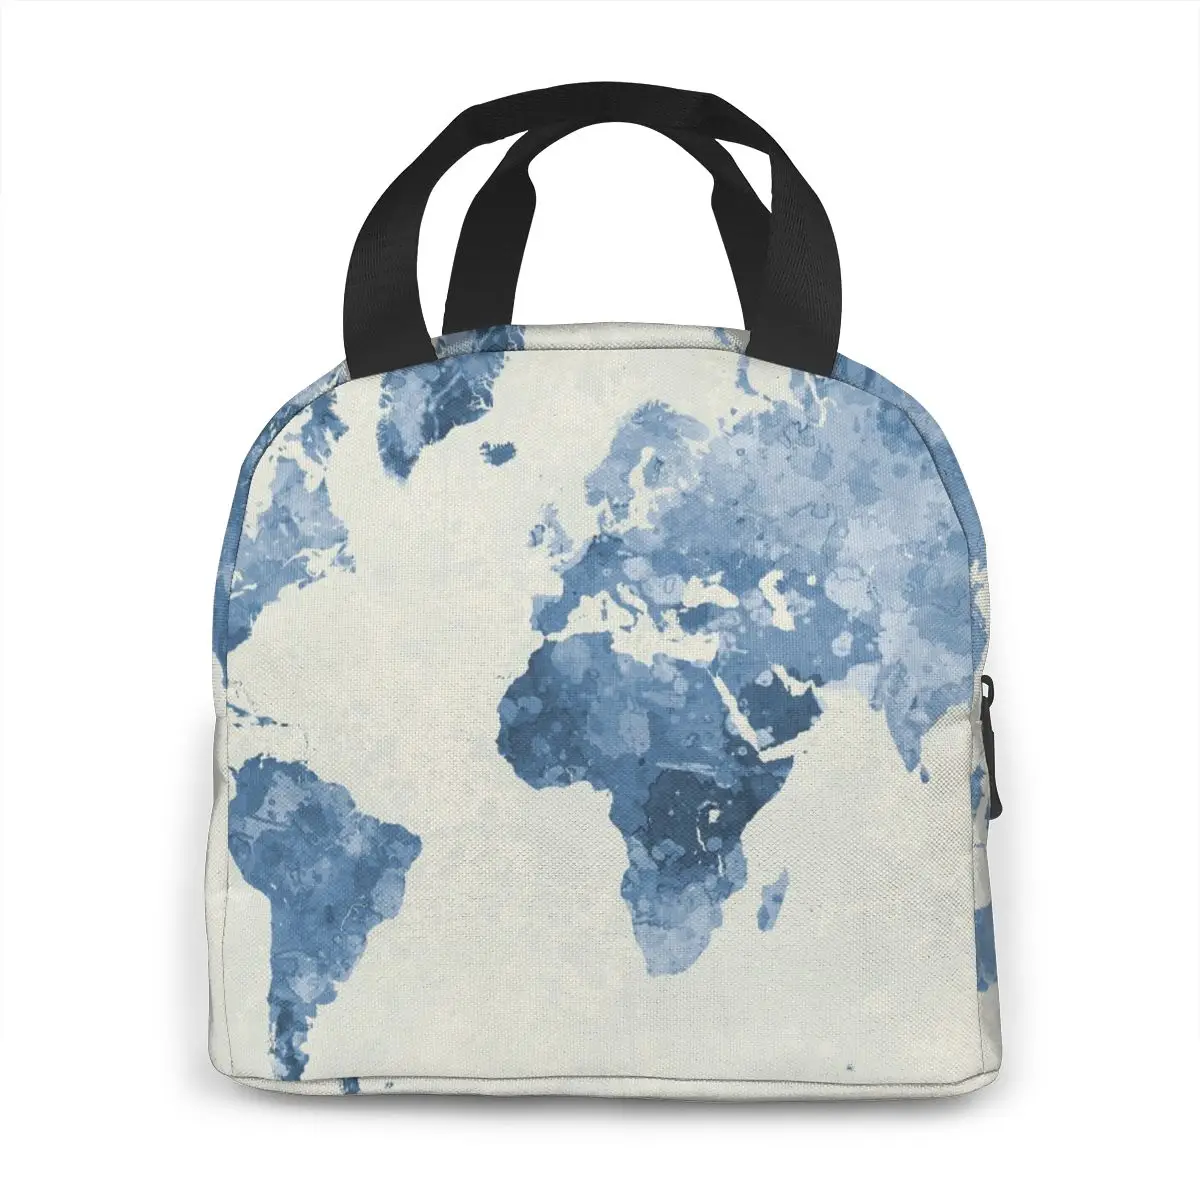 World Map Blue Lunch Food Box Bag Fashion Insulated Thermal Picnic for Women kids Men Cooler Tote | Багаж и сумки